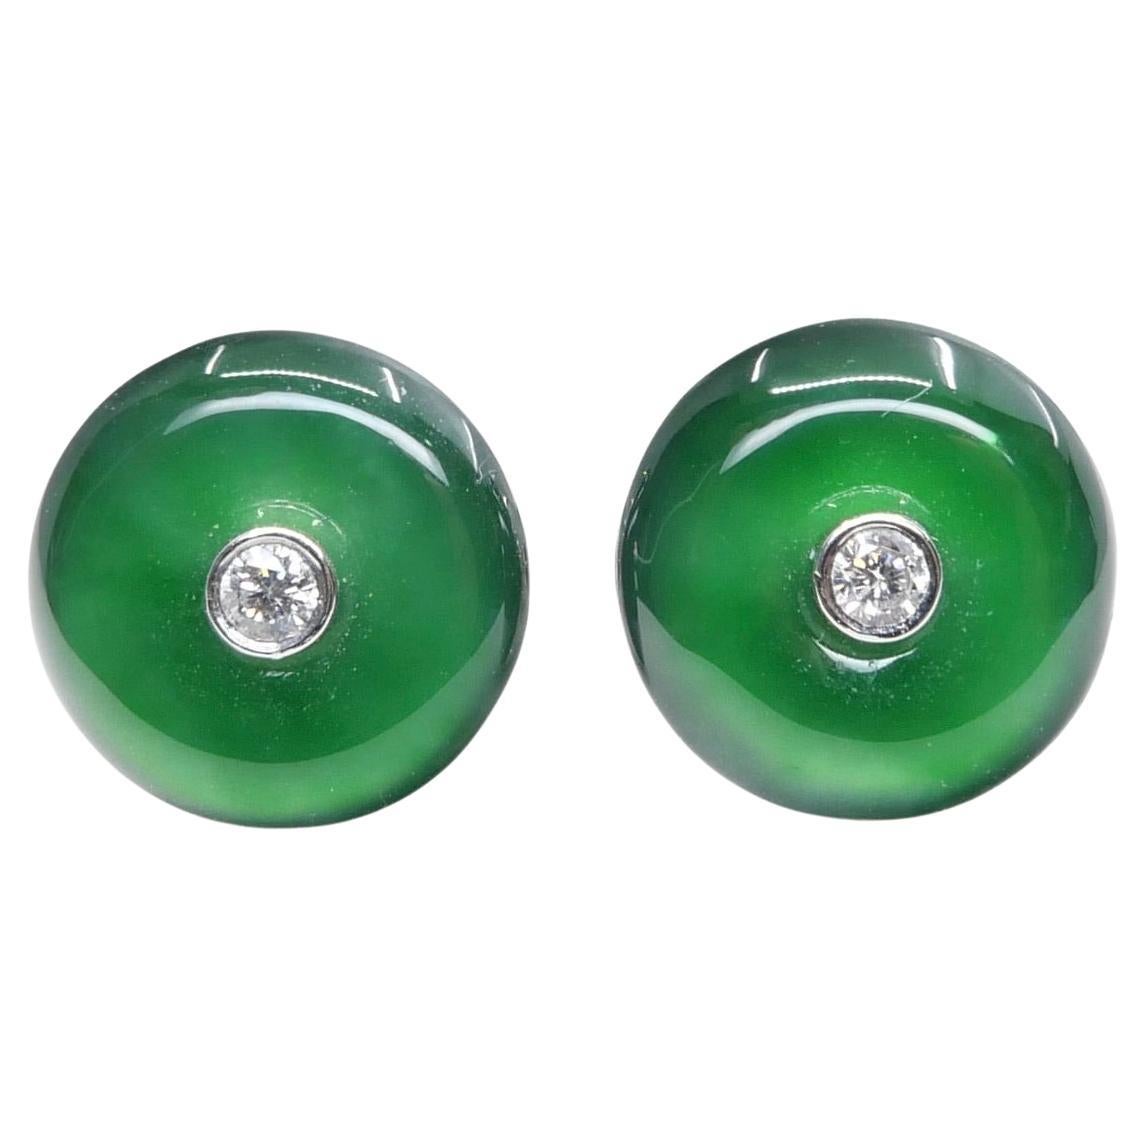 Certified Natural Type A Jadeite Jade And Diamond Earrings. Imperial Green Color For Sale